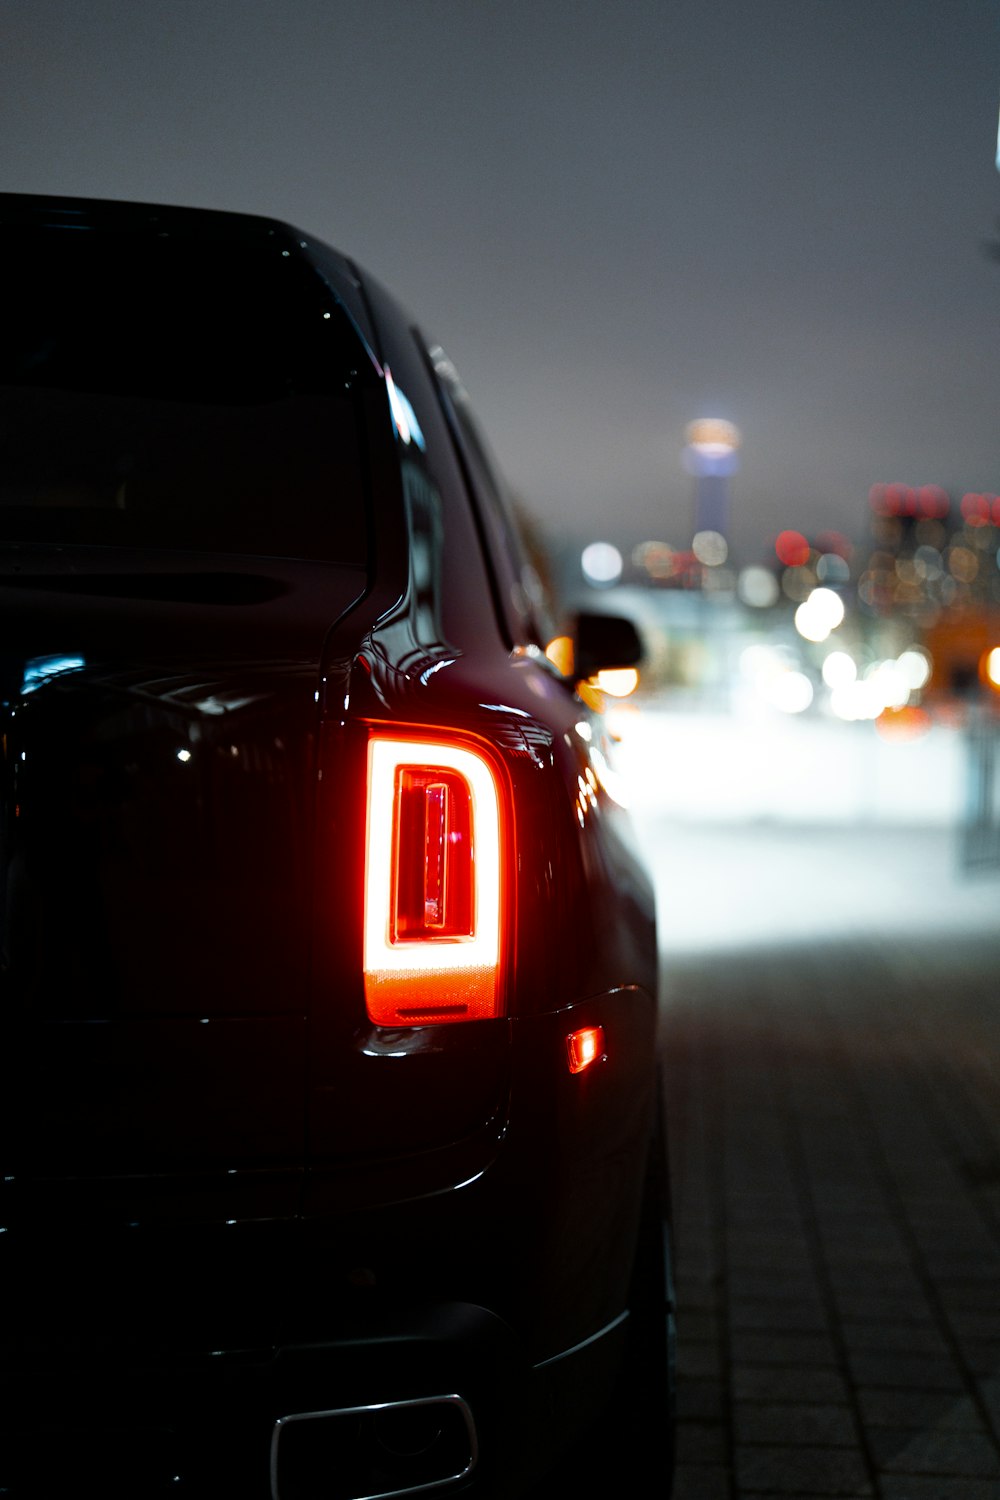 The tail lights of a black car at night photo – Free Rolls Image on Unsplash